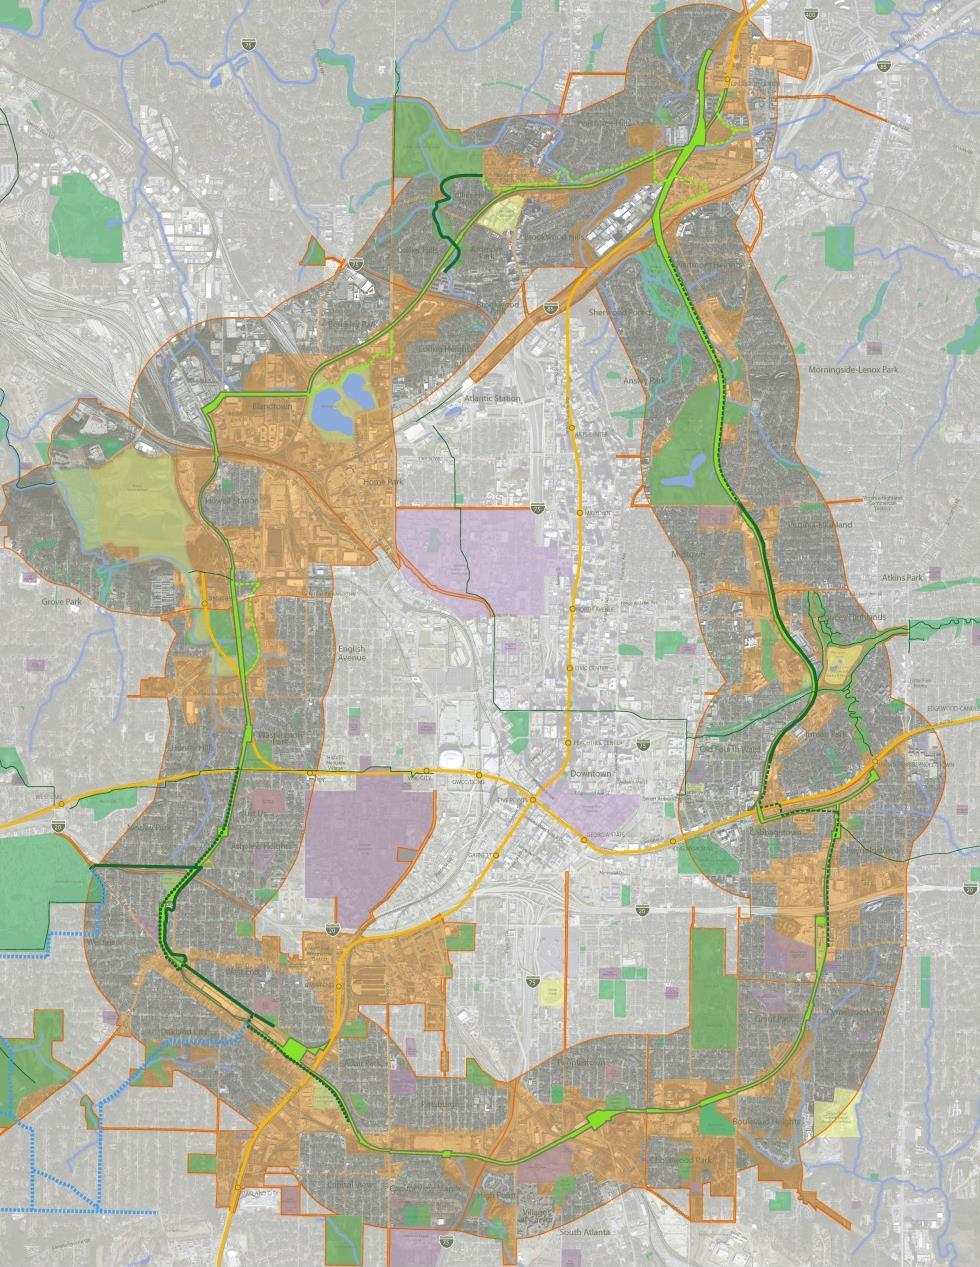 The Atlanta BeltLine TAD Area: 6,500 acres Part of Total Planning area:15,000 acres 22% of the City